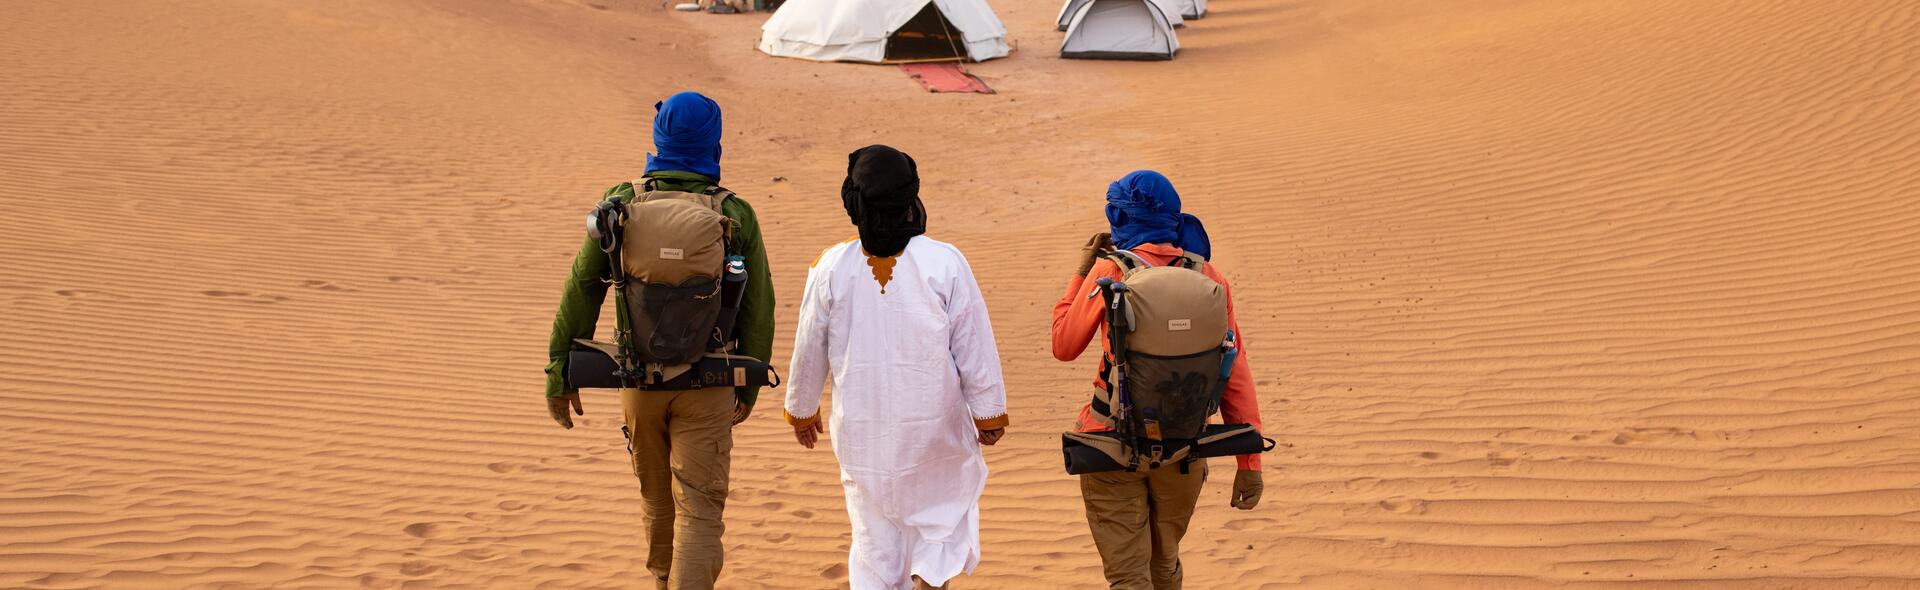 Trekking in the Moroccan desert: routes and advice